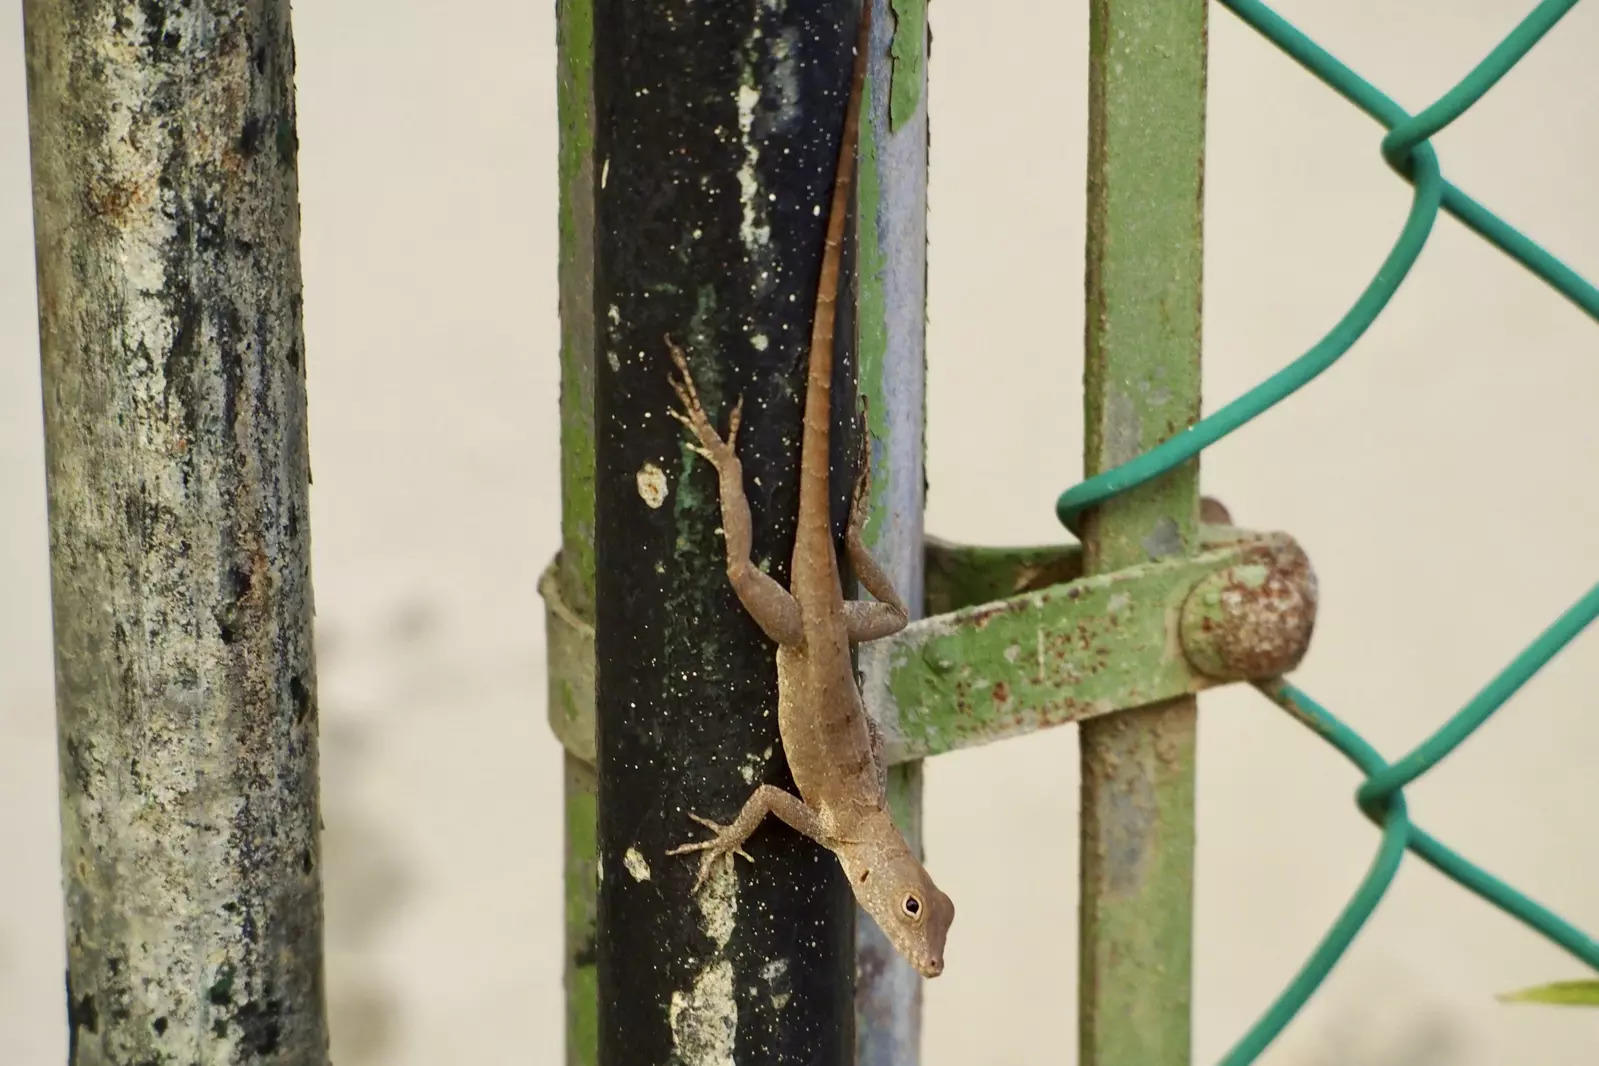 In this photo courtesy of evolutionary biologist Kristin Winchell, an Anolis cristatellus lizard stands on a gate in Rincon, Puerto Rico.